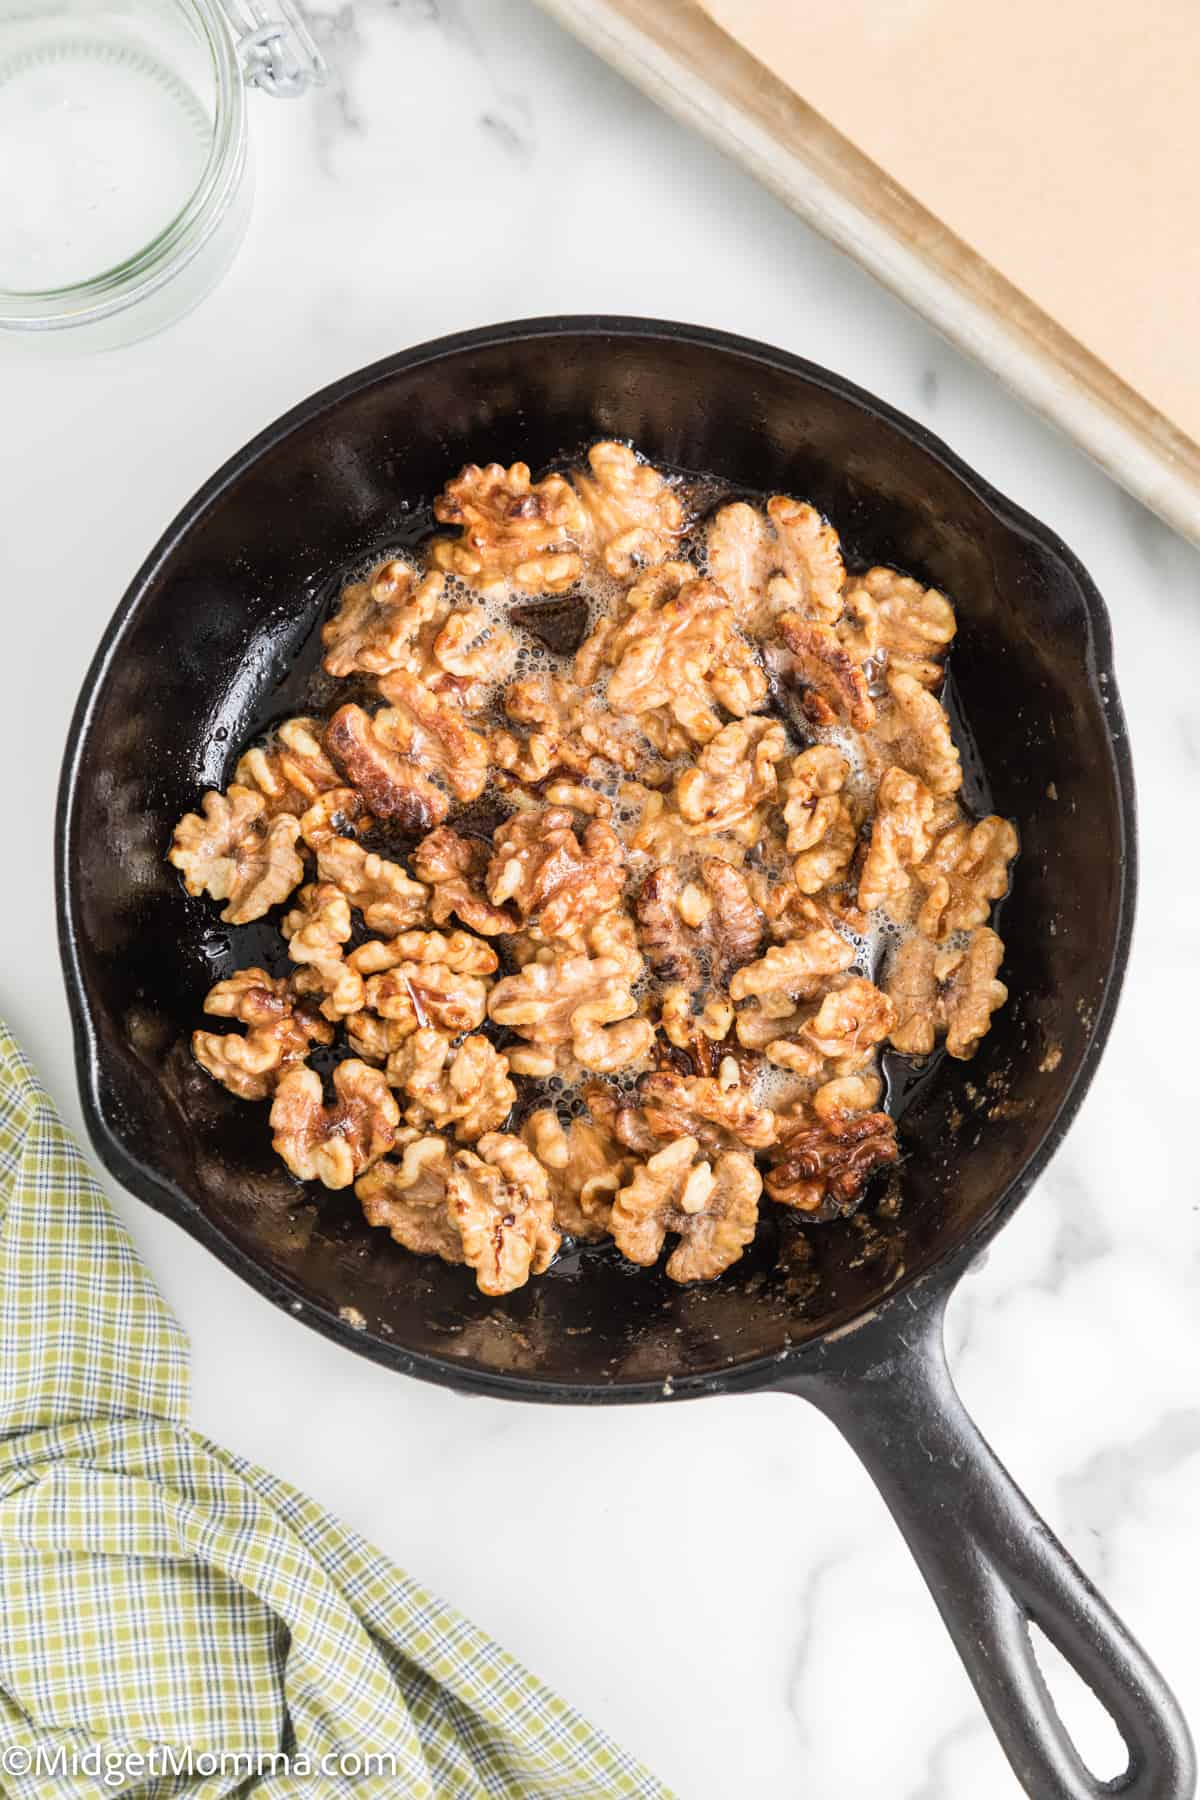 walnuts finished cooking in a pan